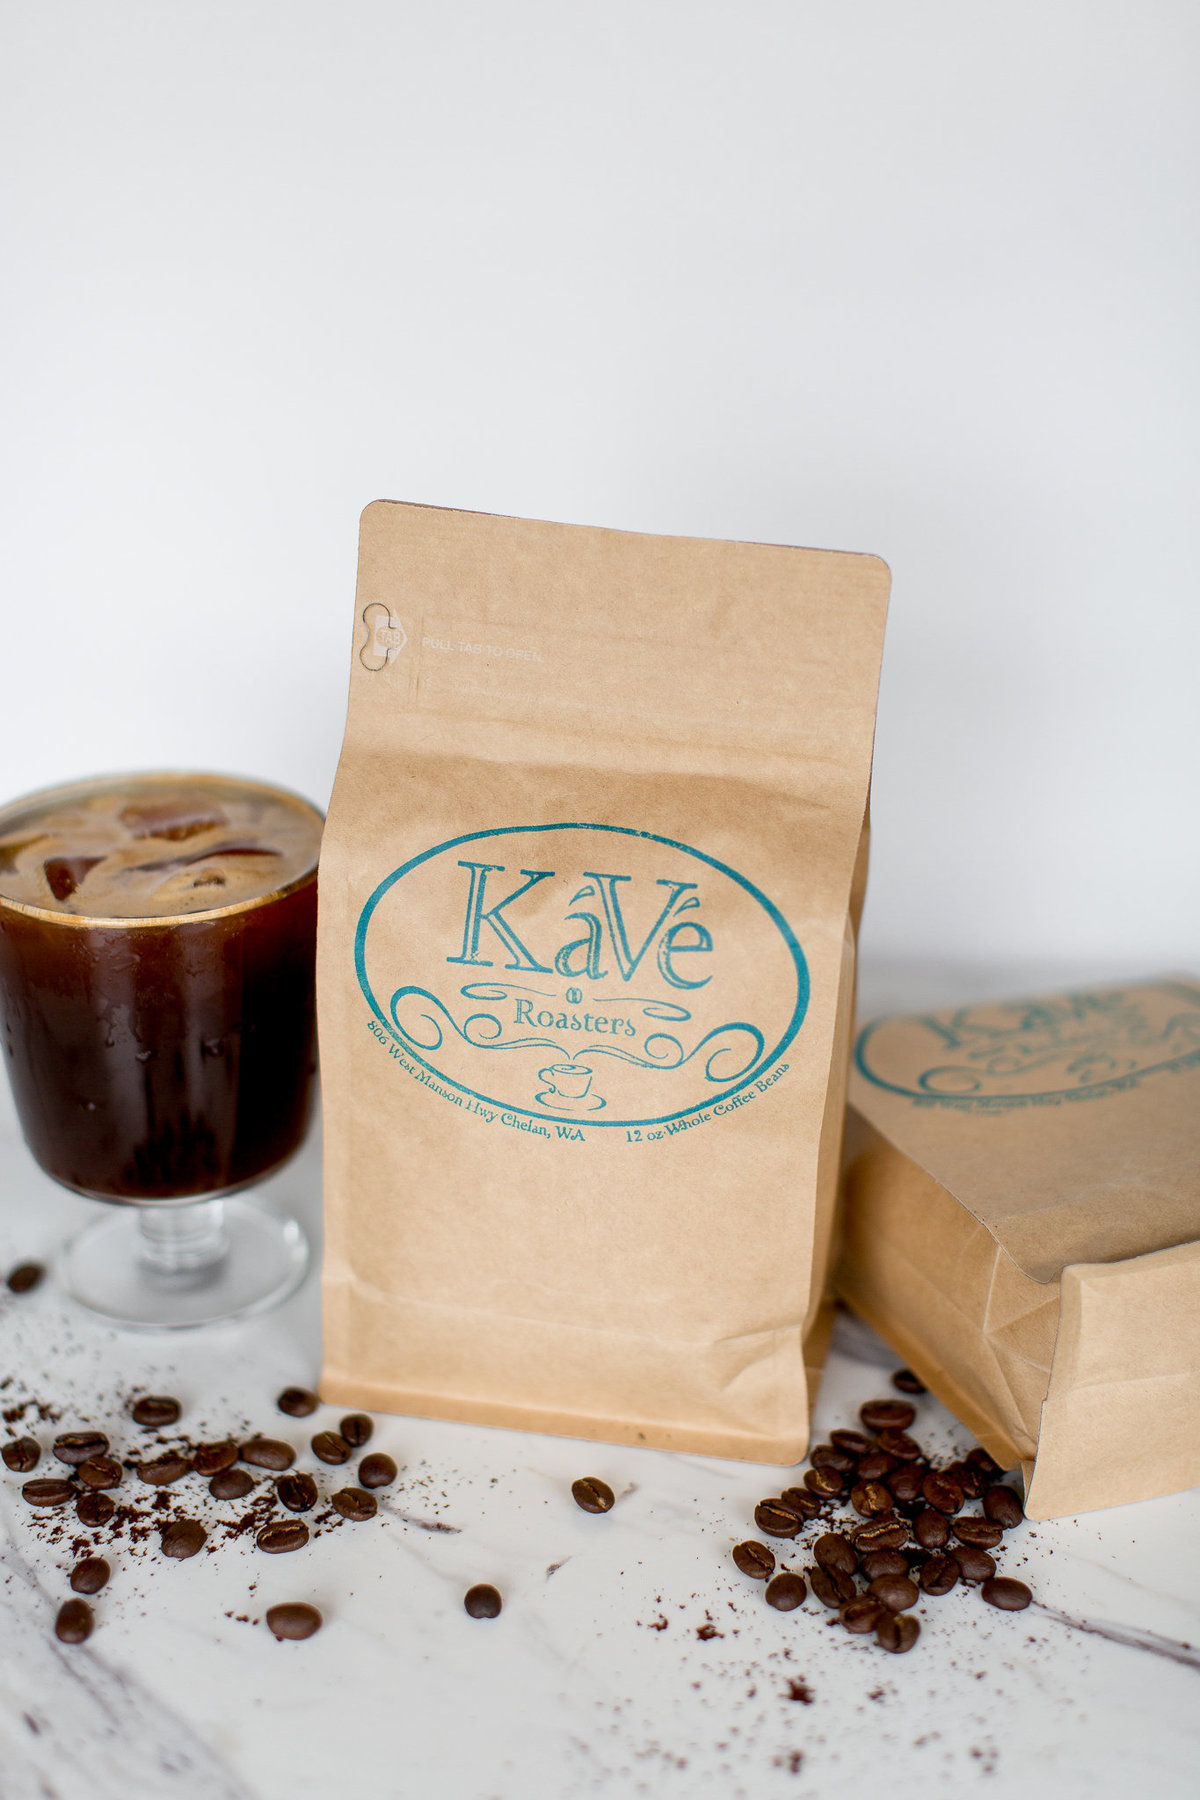 Kave Roaster & Bakery | Preview | Emily Moller Photography | Lake Chelan Brand Photographer (3 of 4)